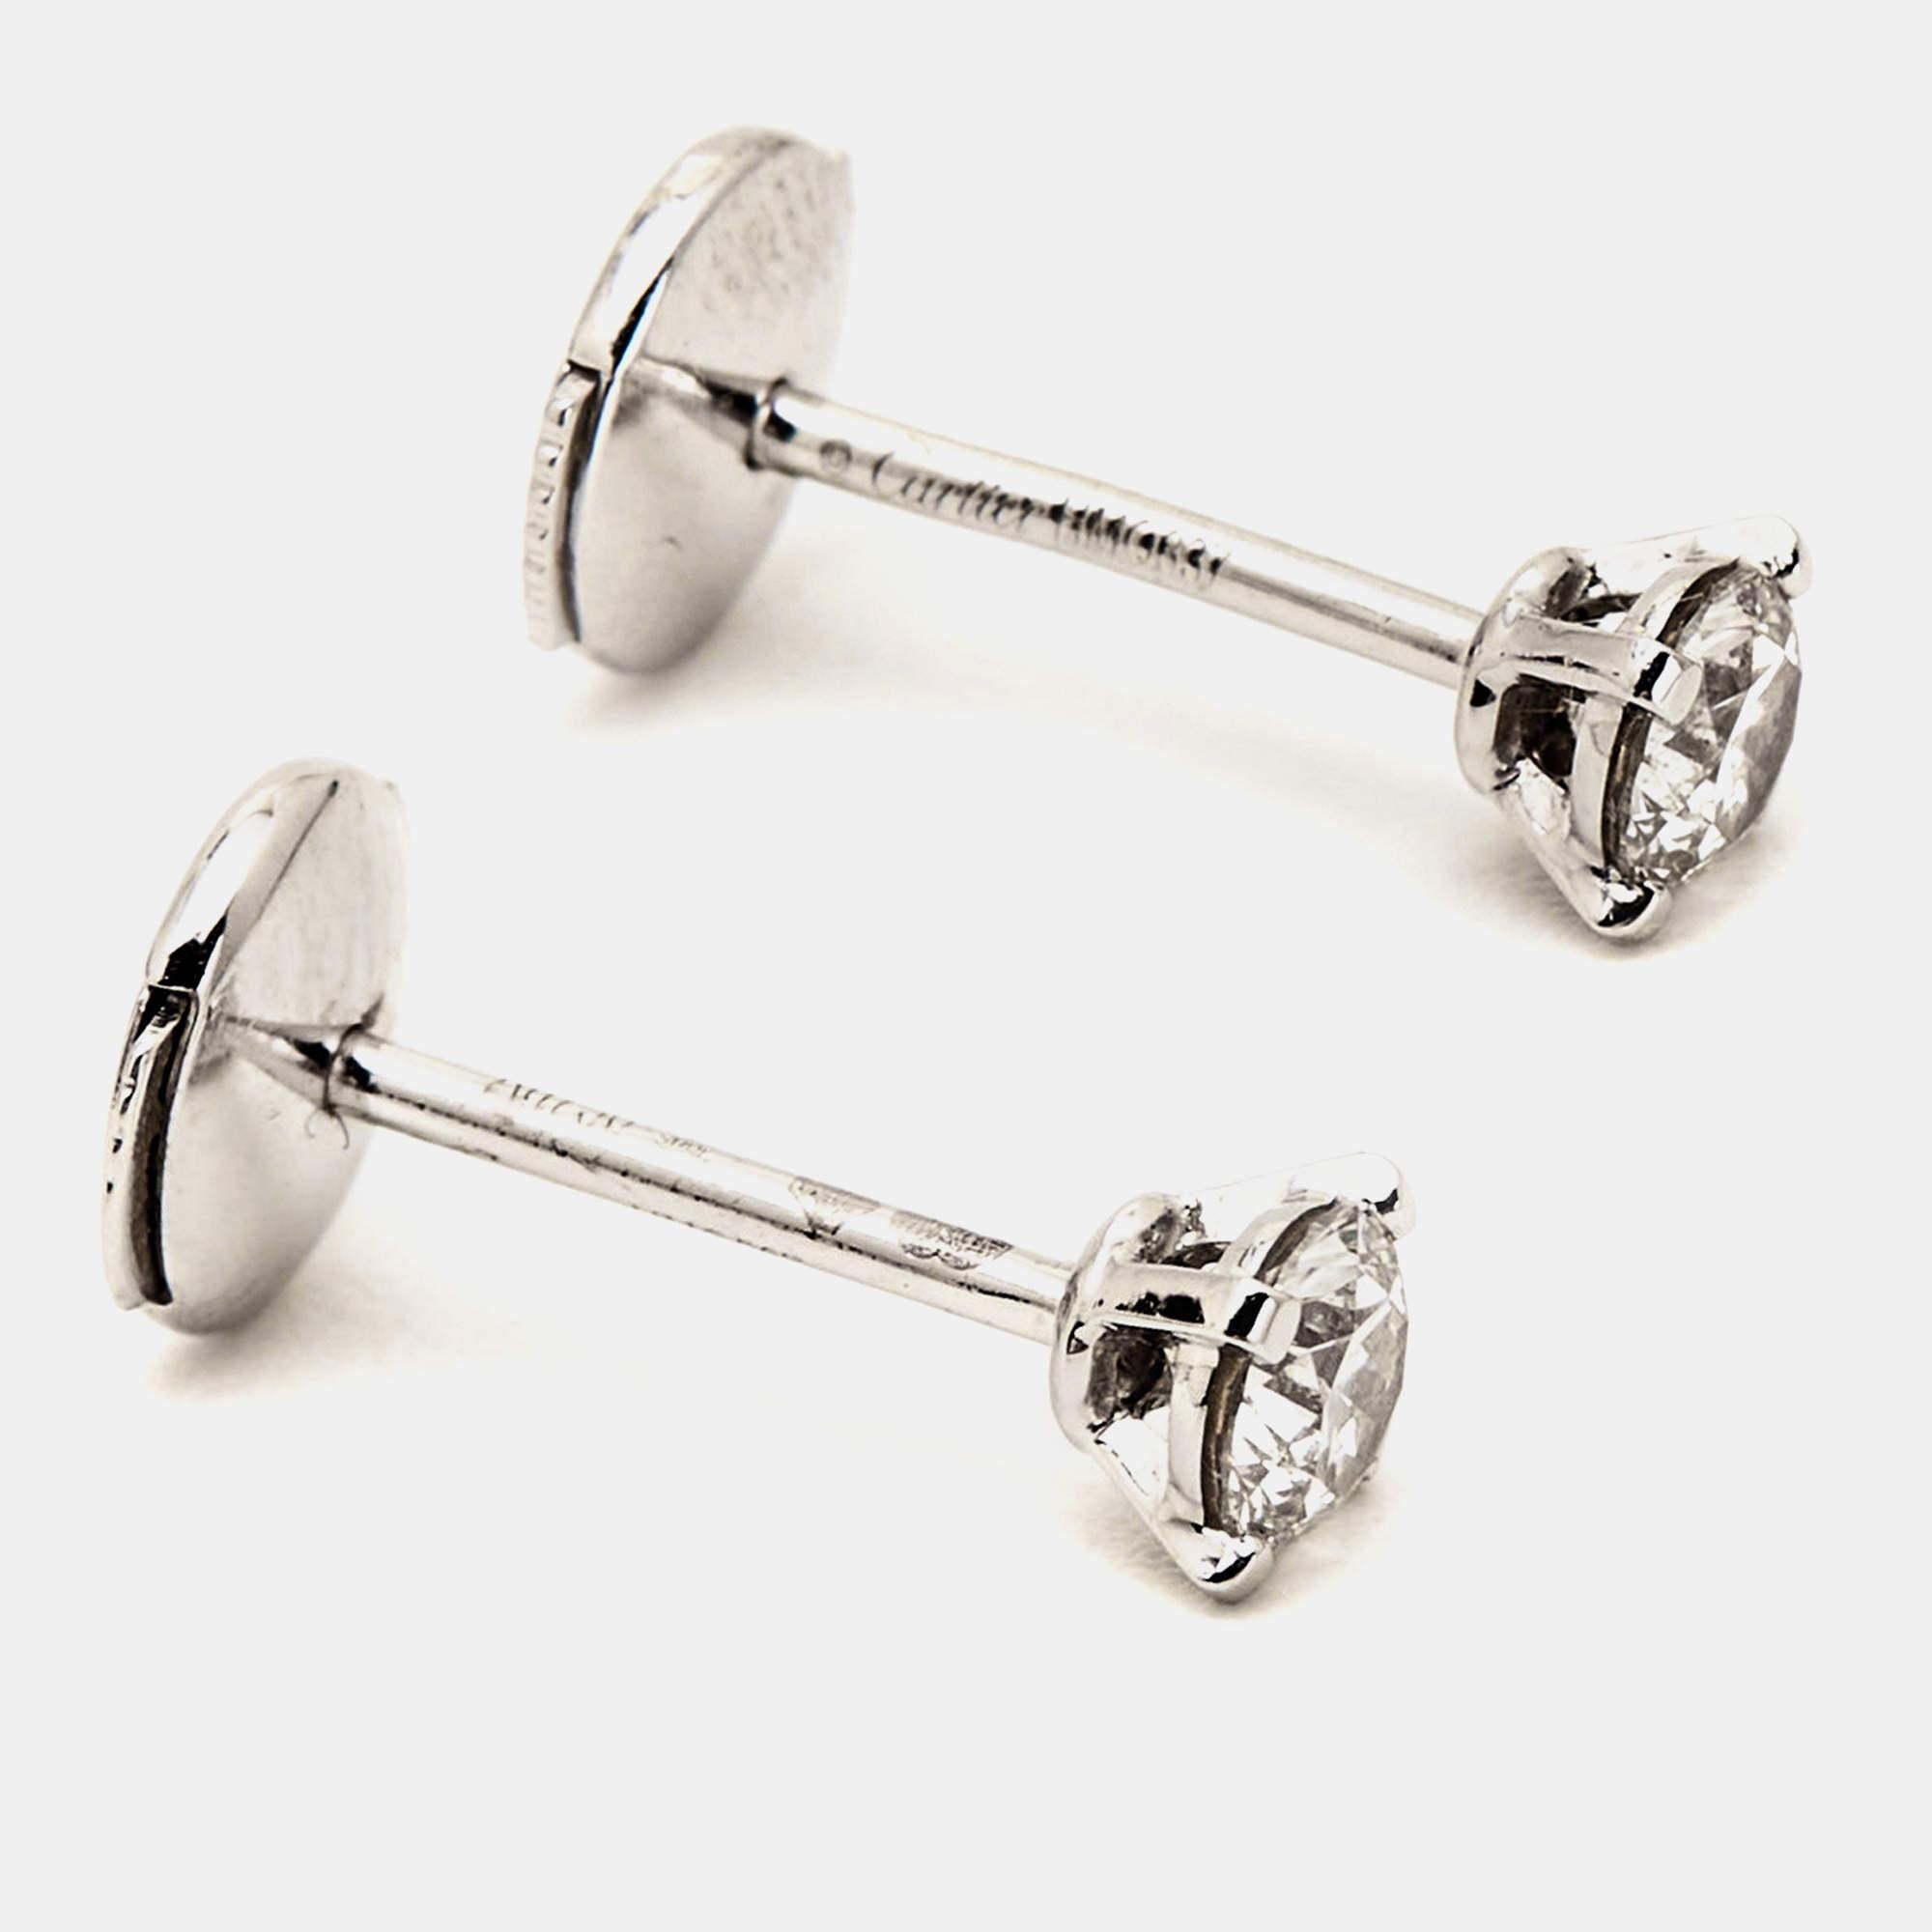 The Cartier 1895 Solitaire diamond earrings are exquisite jewelry pieces. Crafted in 18k white gold, these stud earrings feature single diamonds, creating a sparkling and elegant look. With their impeccable craftsmanship and understated elegance,